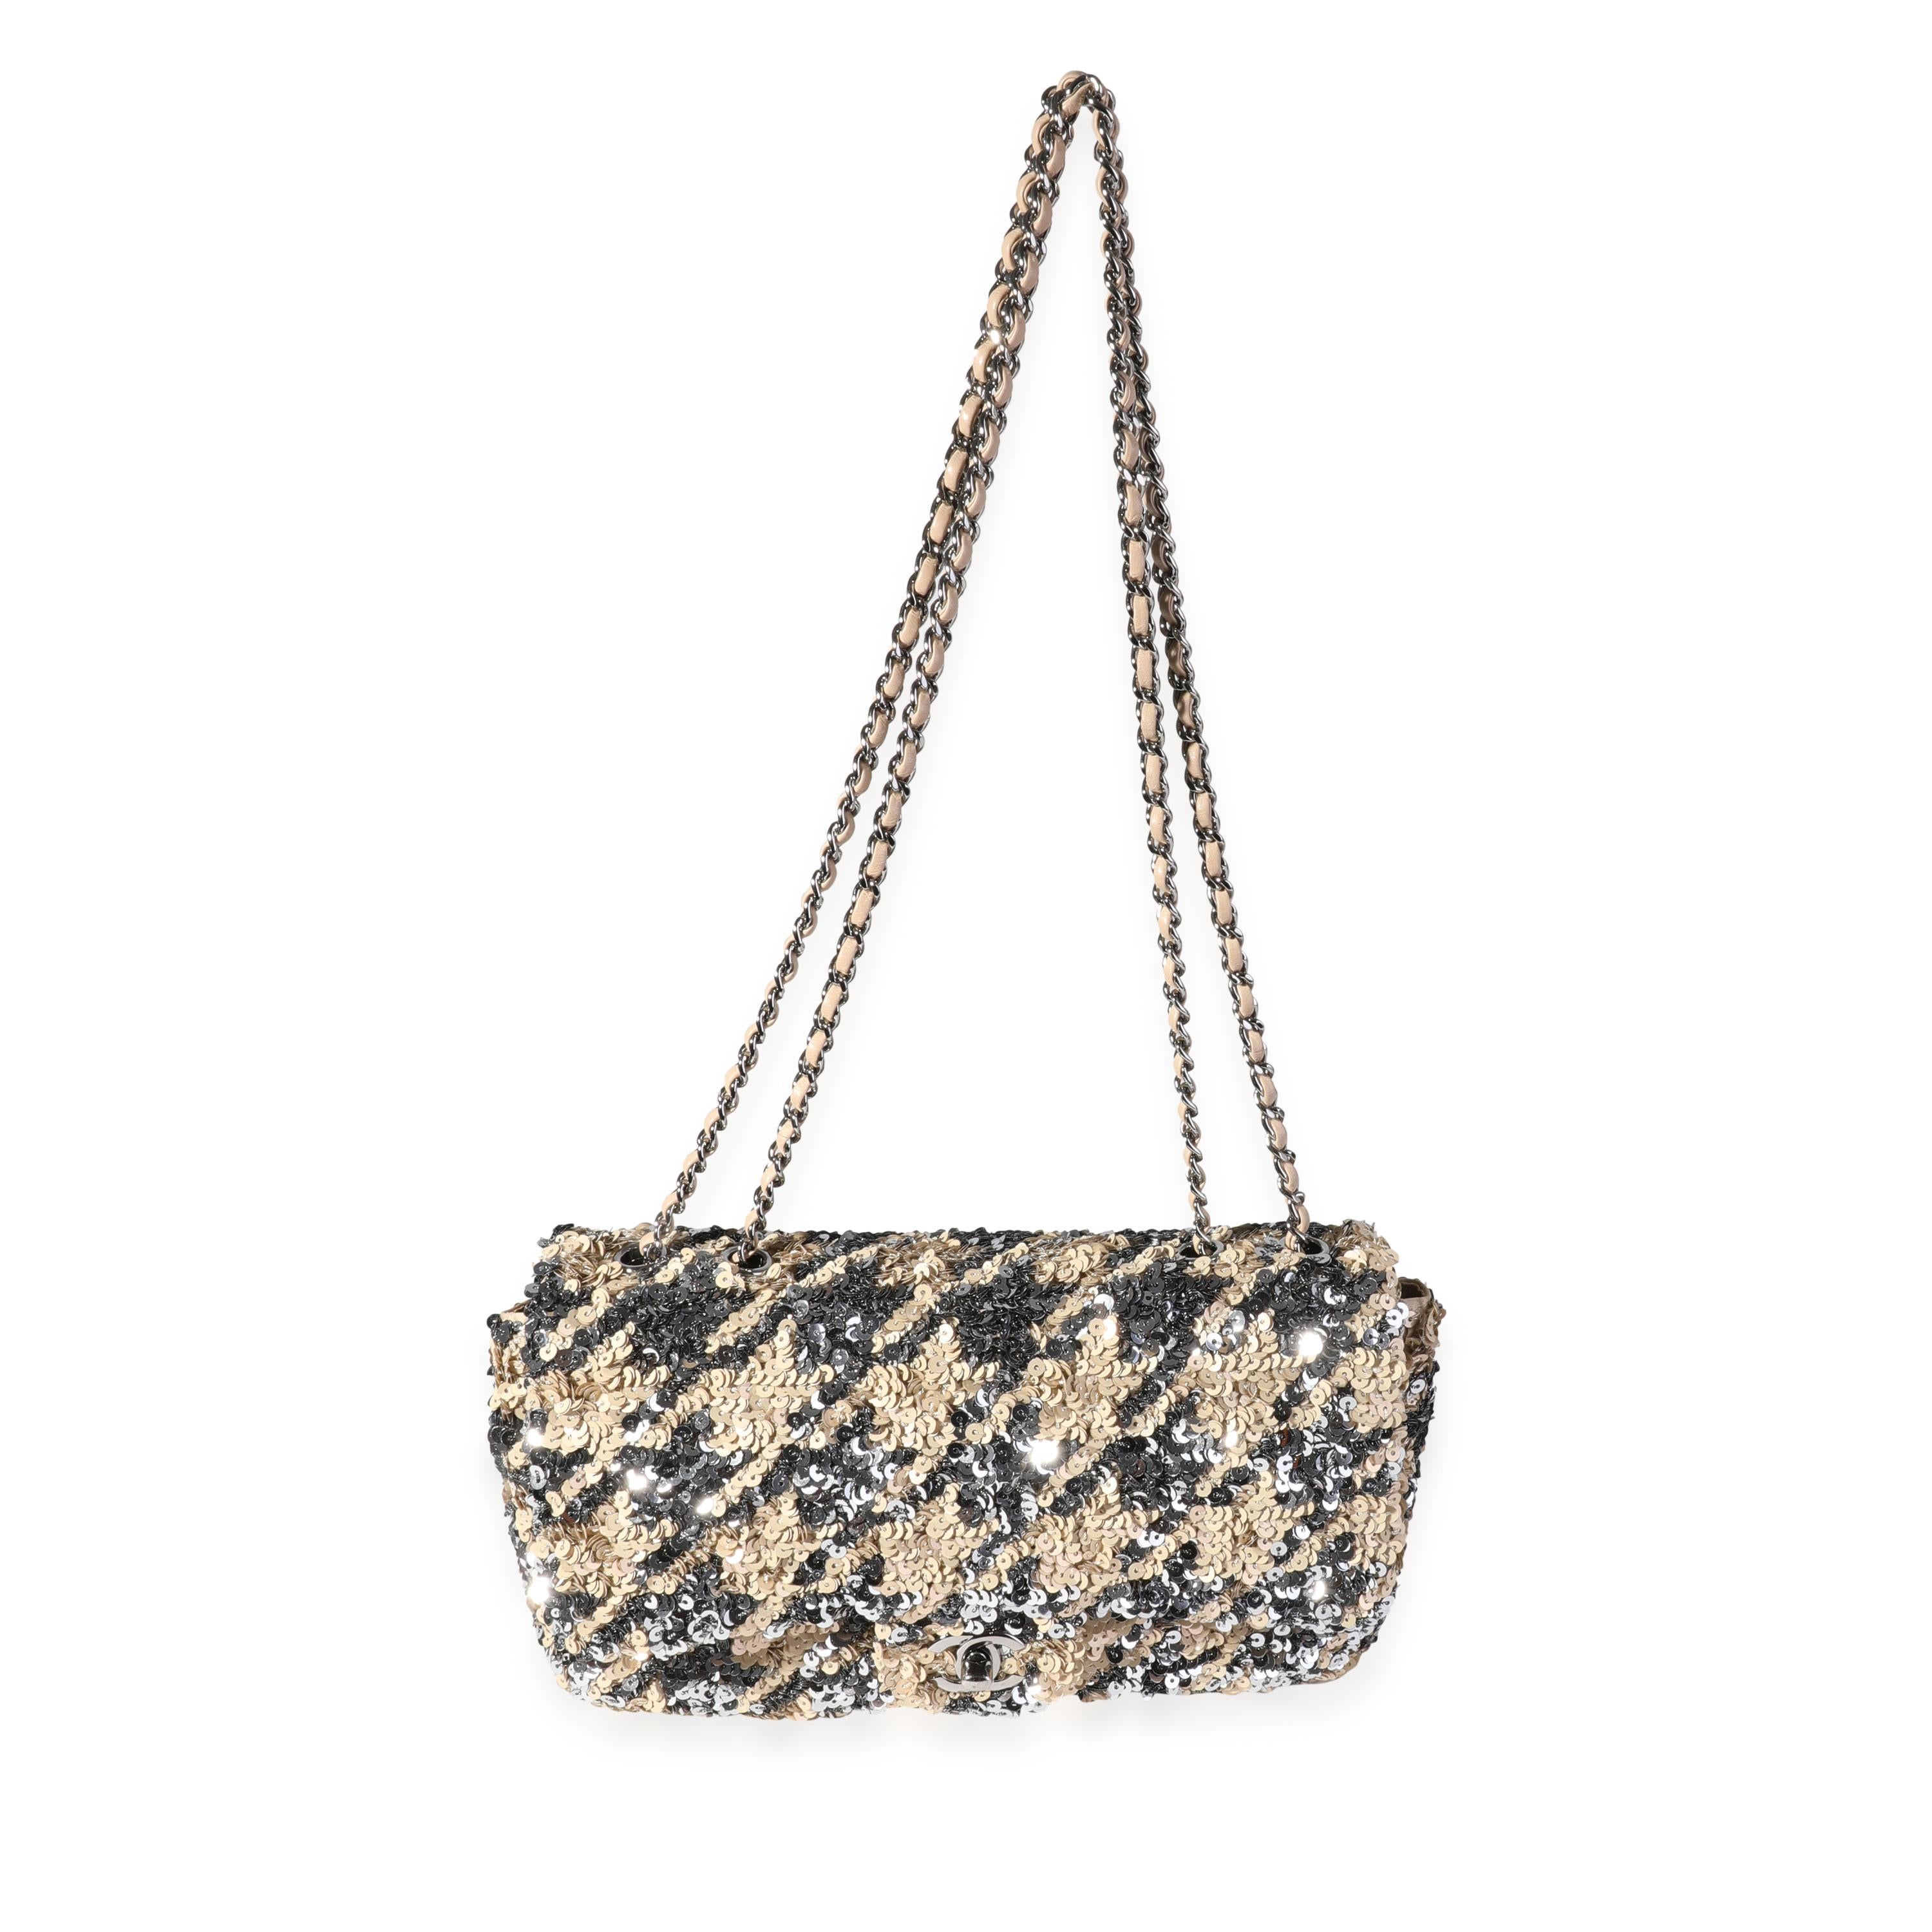 Listing Title: Chanel Gunmetal & Gold Sequin Houndstooth Medium Single Flap Bag
SKU: 118668
Condition: Pre-owned (3000)
Handbag Condition: Excellent
Condition Comments: Signs of wear on interior
Brand: Chanel
Model: 2020 Classic Medium Sequin Flap